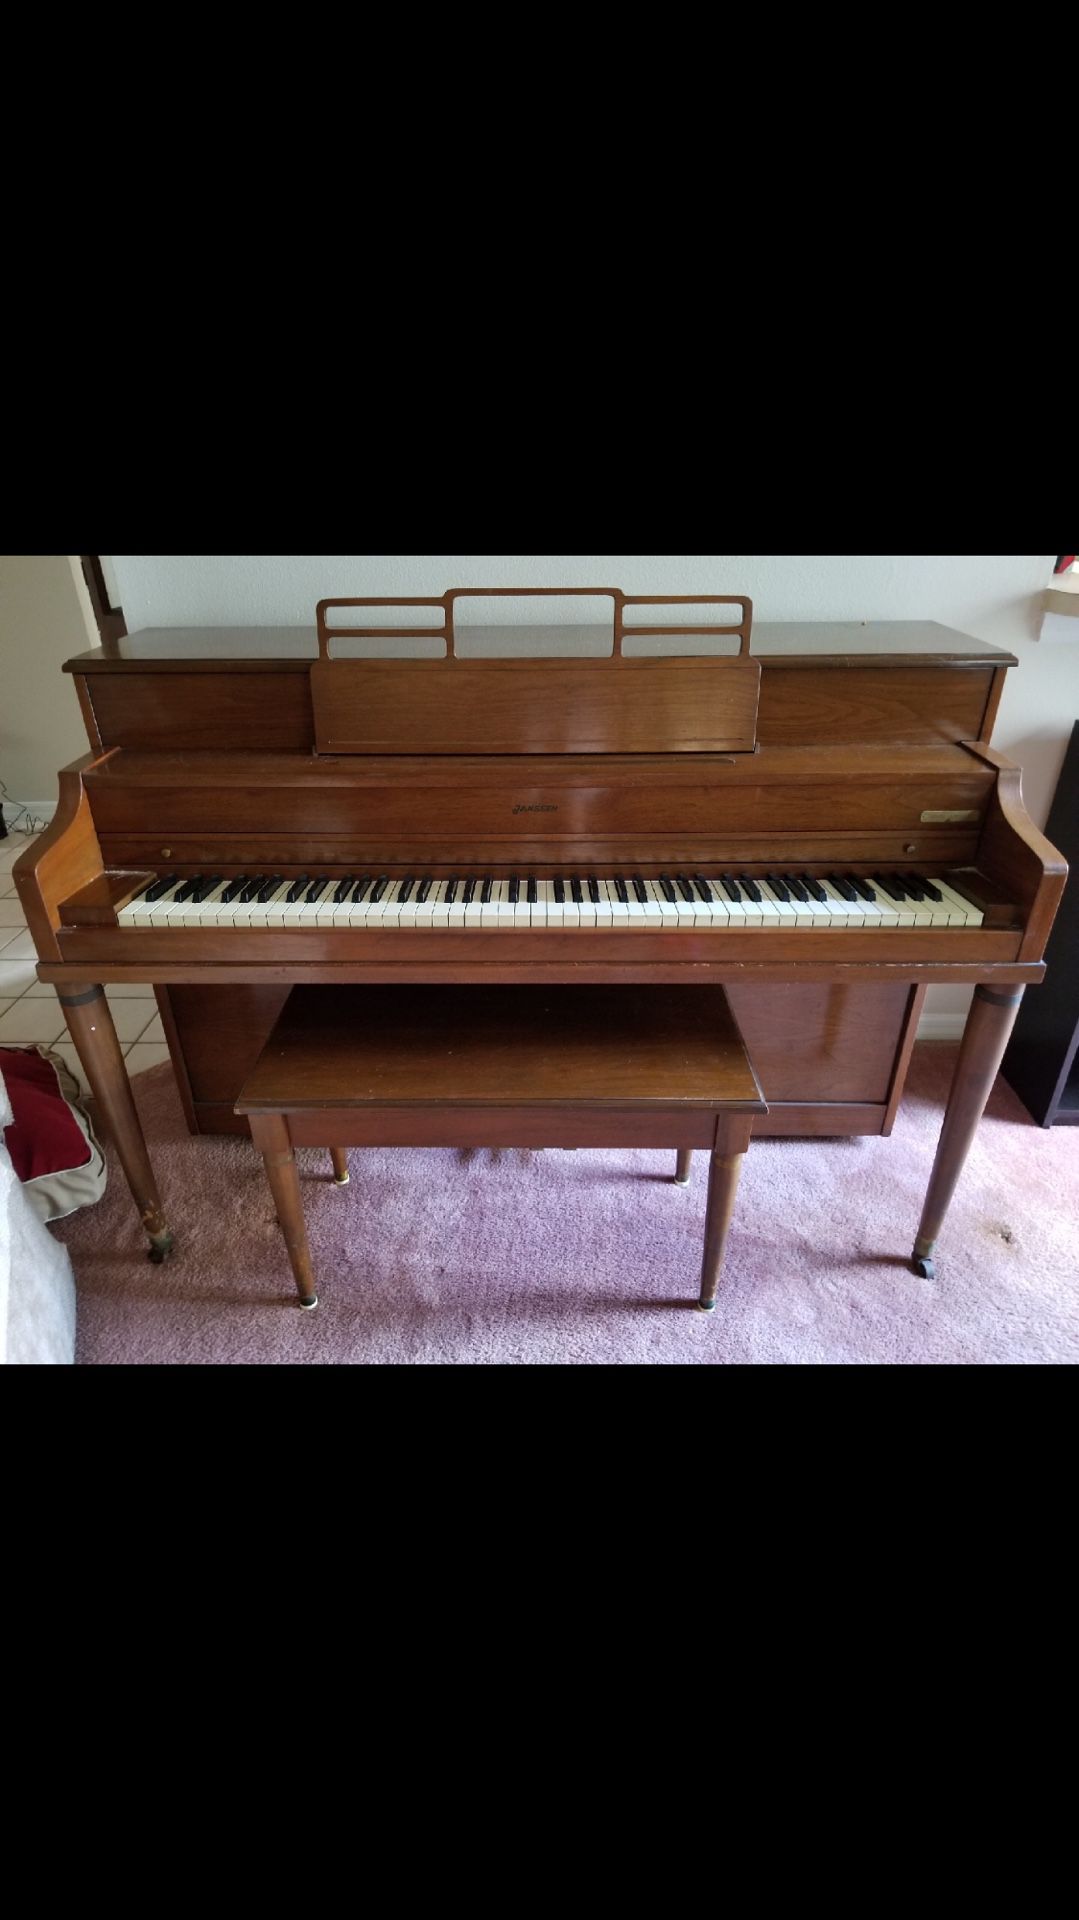 Jansen upright 55 years old. excellent shape just needs tuning 250 or best offer